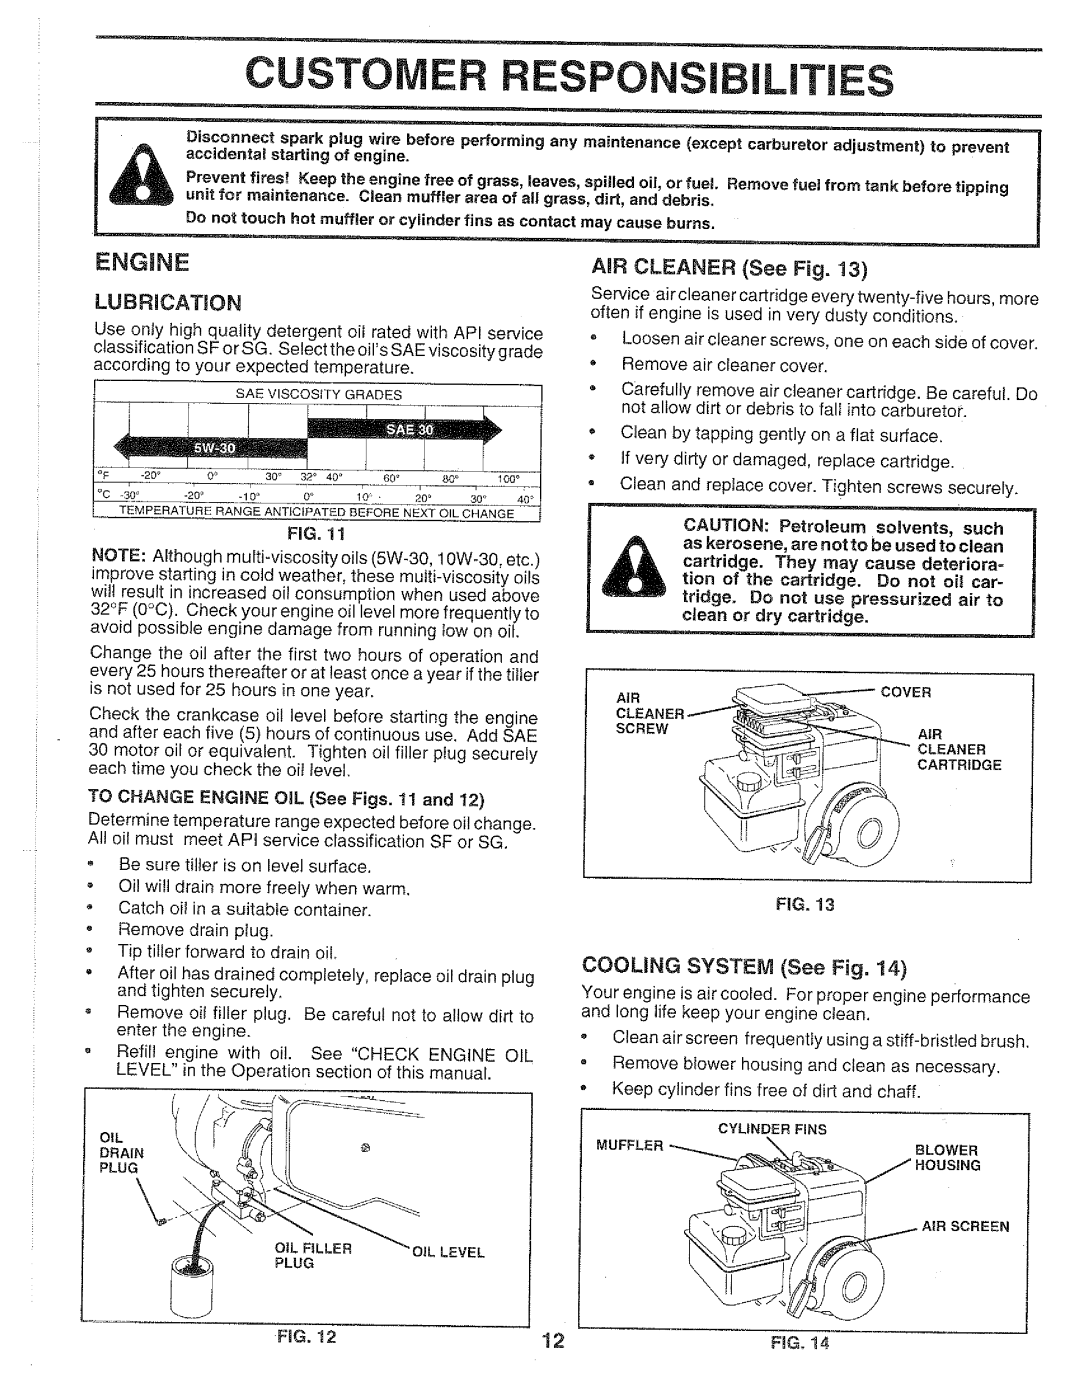 Weed Eater WEF550D manual 